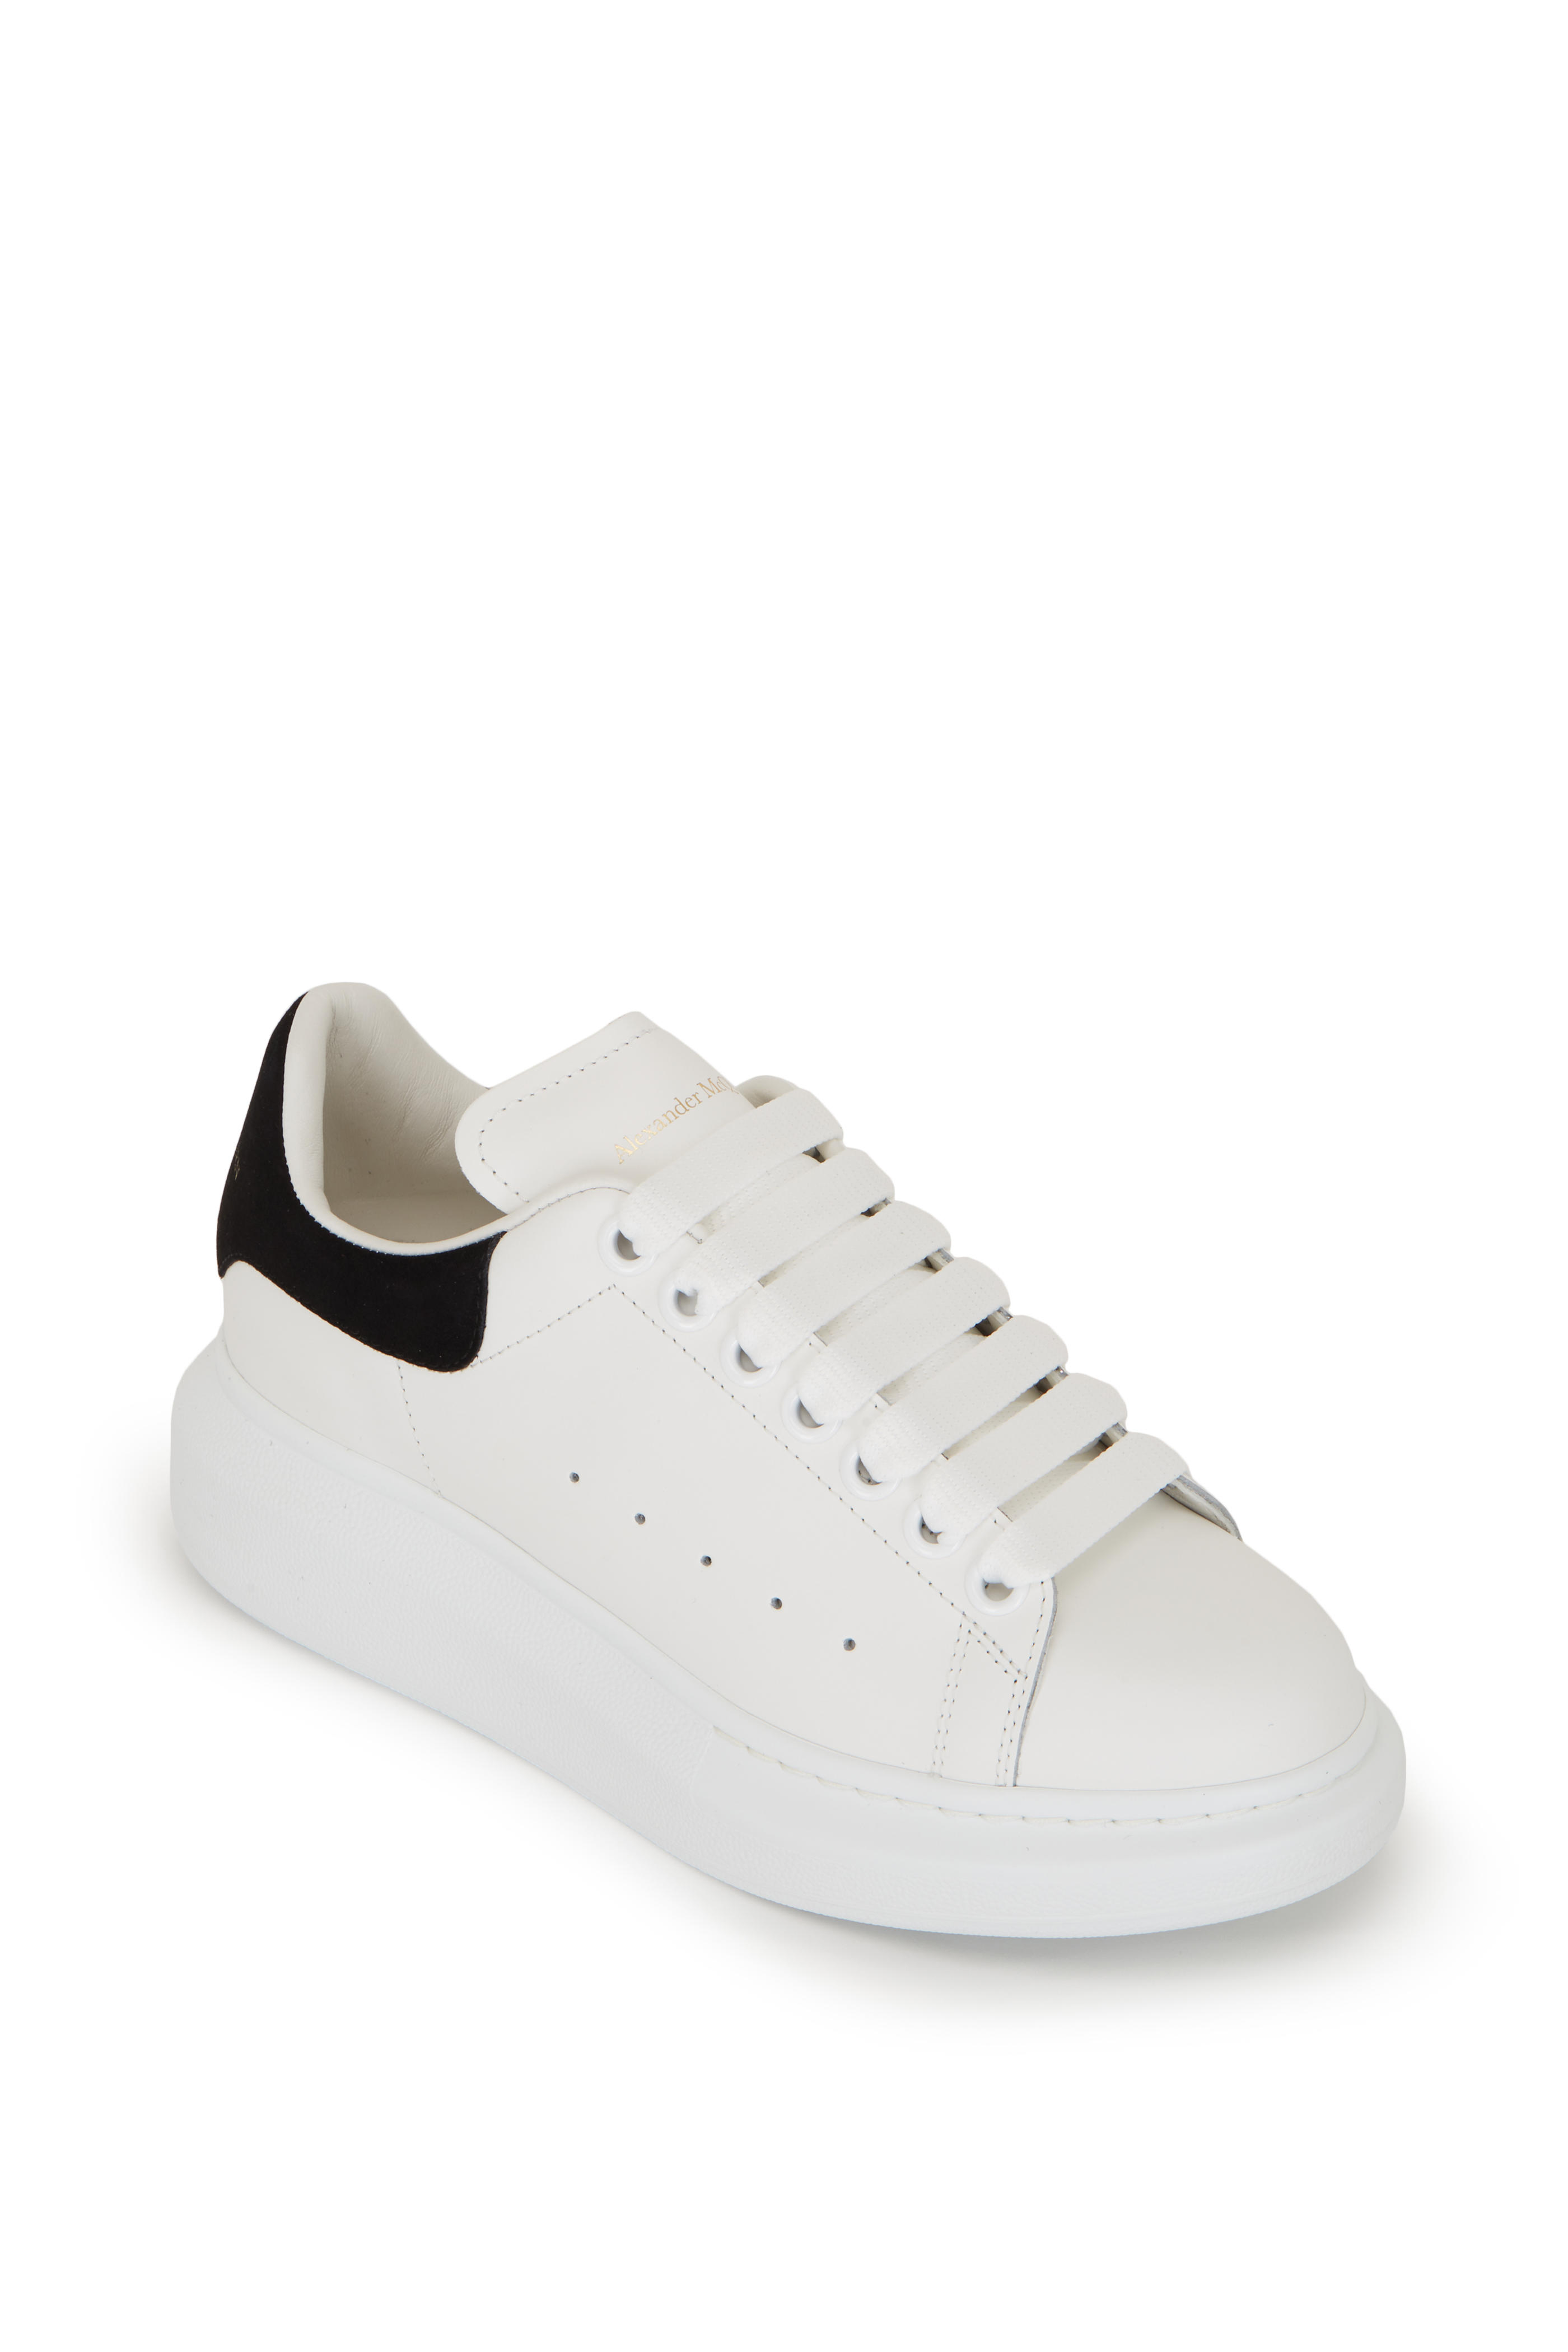 ulæselig Diktat span Alexander McQueen - White & Black Leather Exaggerated Sole Sneaker |  Mitchell Stores